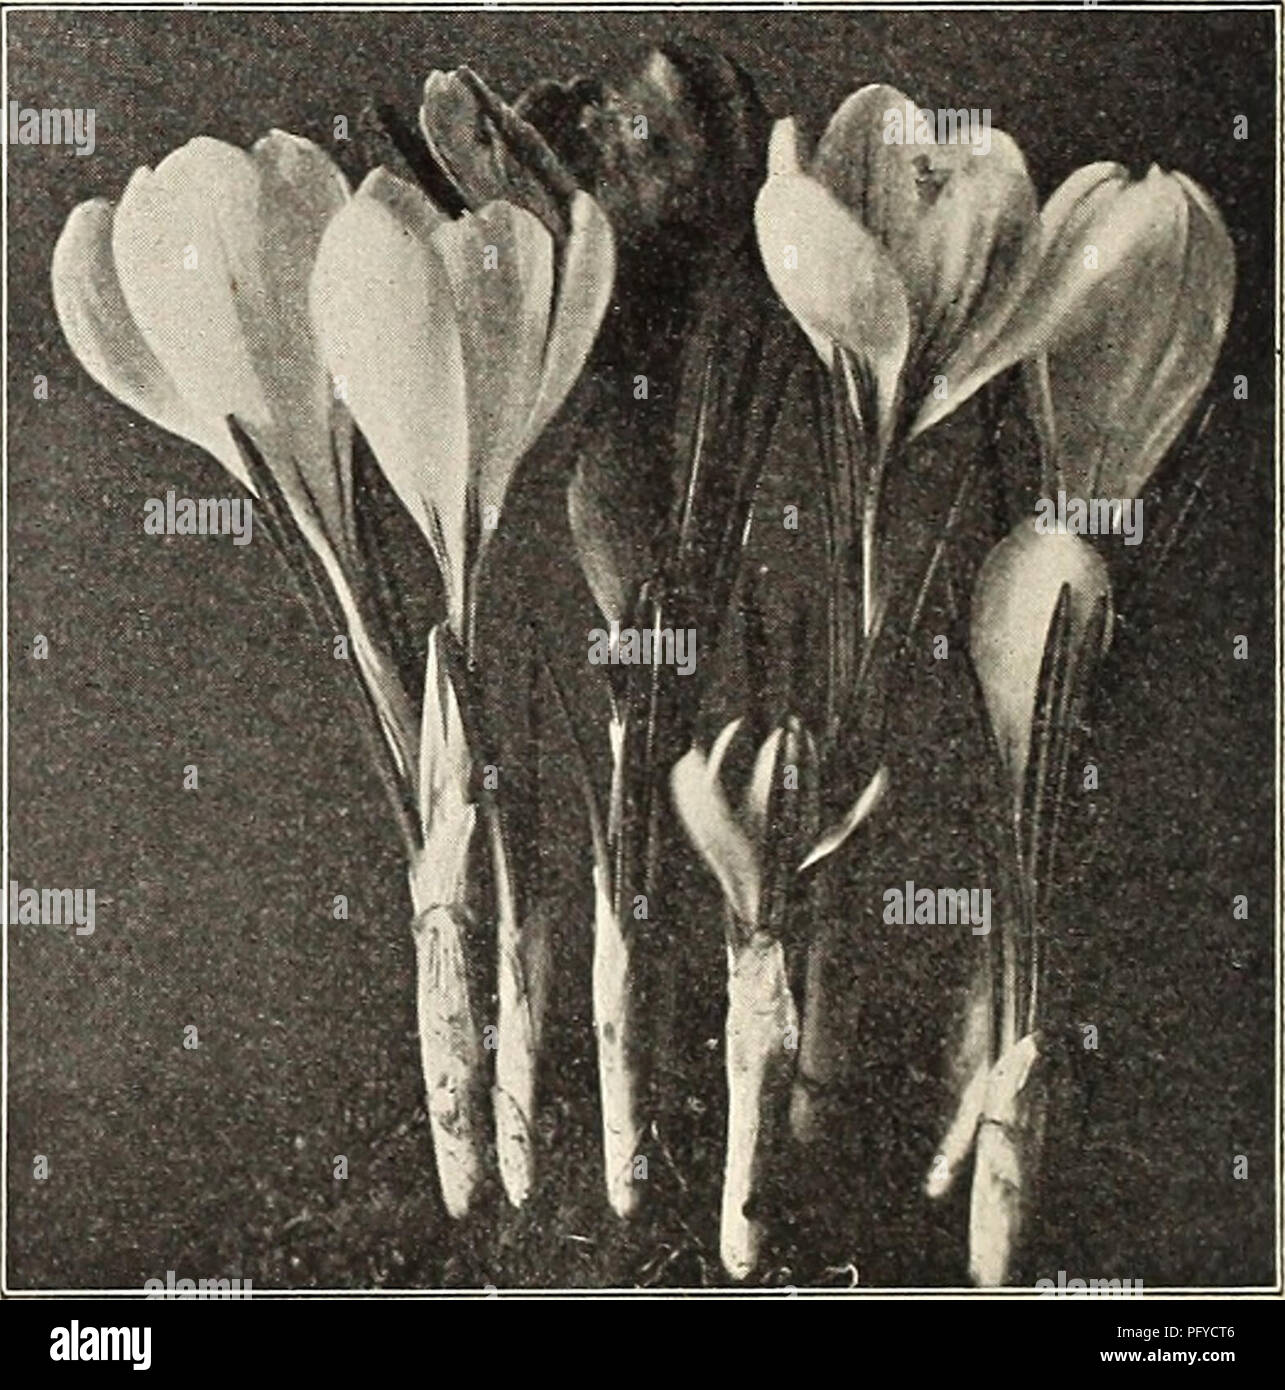 . Currie's bulbs and plants : autumn 1914. Flowers Seeds Catalogs; Bulbs (Plants) Seeds Catalogs; Nurseries (Horticulture) Catalogs; Plants, Ornamental Catalogs. ANEMONE. Each Doz. 100 St. Brigid (Irish Anemone)—A magnificent variety with large, semi-double, brilliant colored flowers in all shades from white to the brightest scarlet, blue, mauve, maroon, striped, etc., borne freely on long stems, and are excellent for cut flowers. The tubers may be planted in fall outdoors in sheltered places if well protected $ .04 $ .40 $2. 50 Single (The Bride)—Pure white 02 .20 1.25 Single (Fulgens)—The mo Stock Photo